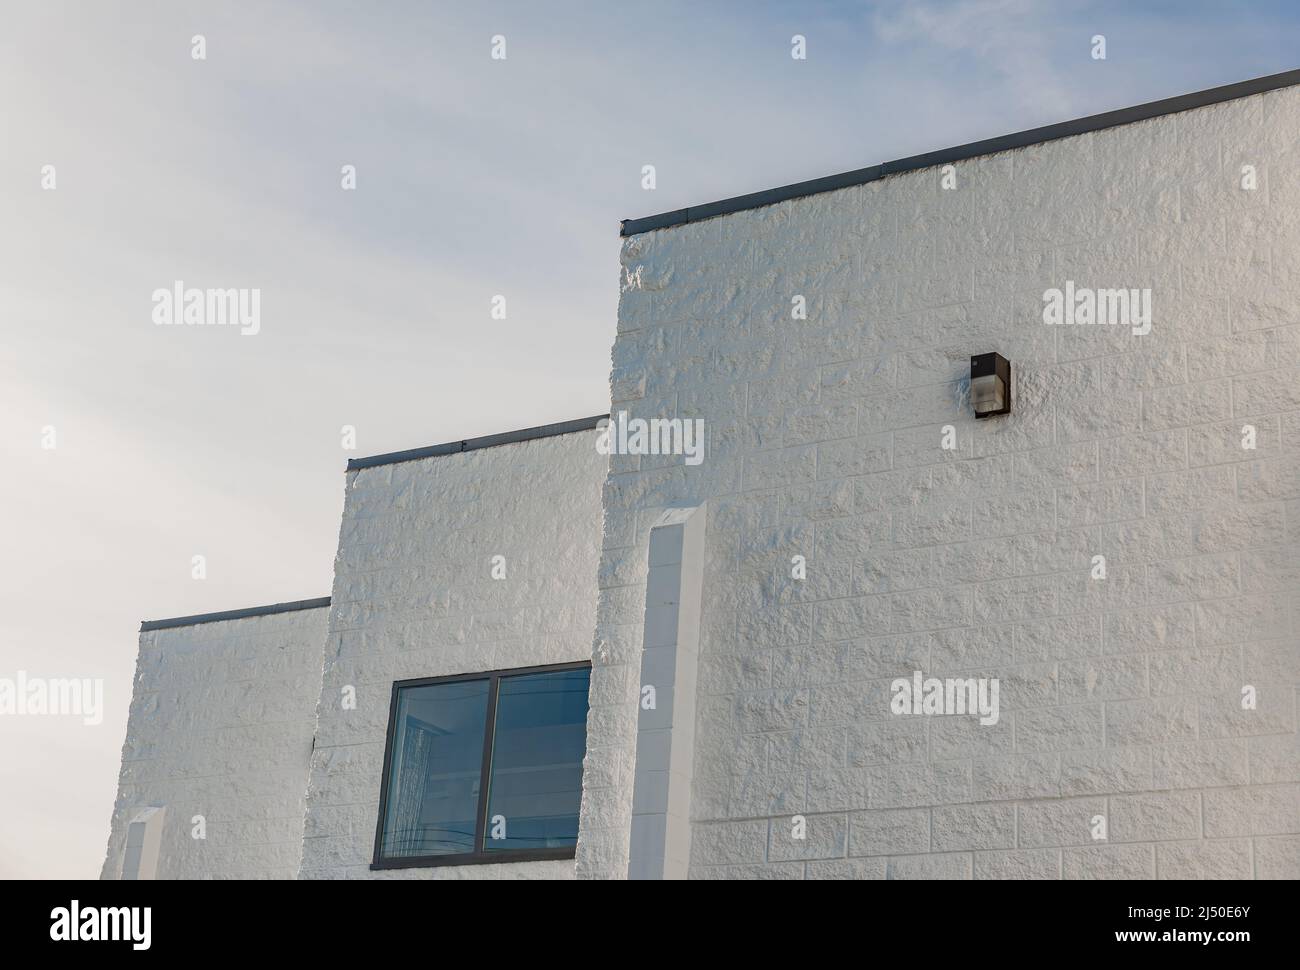 Abstract architecture against sky. Modern white building against a sky. Street photo, nobody, copy space for text Stock Photo